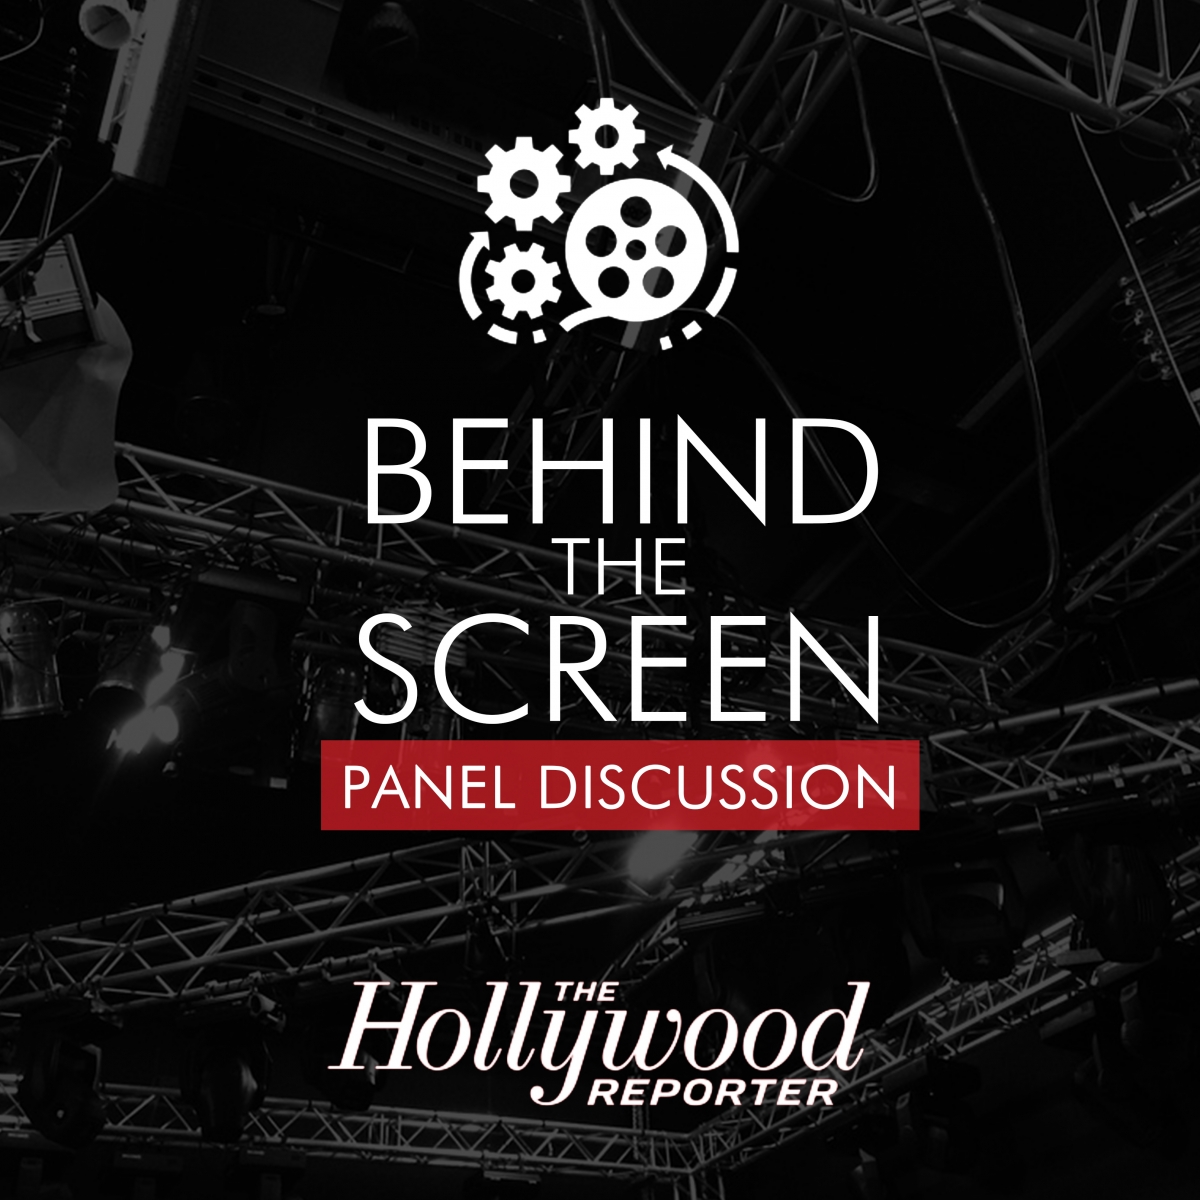 Segun takes part in Hollywood Reporter Roundtable